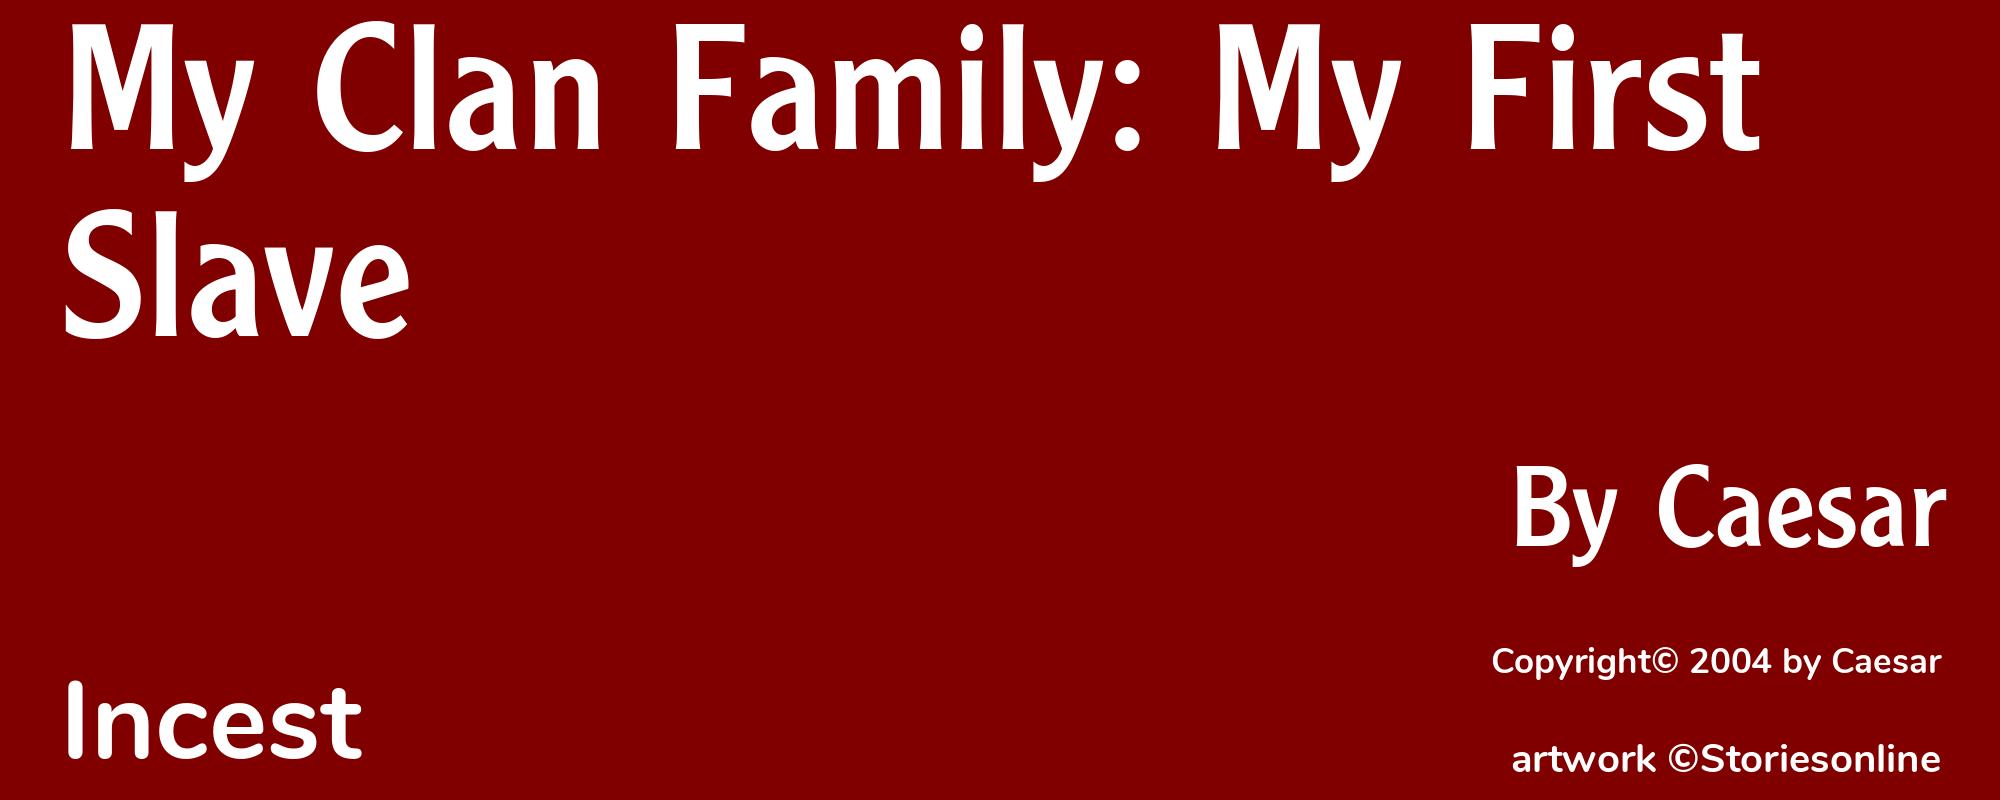 My Clan Family: My First Slave - Cover